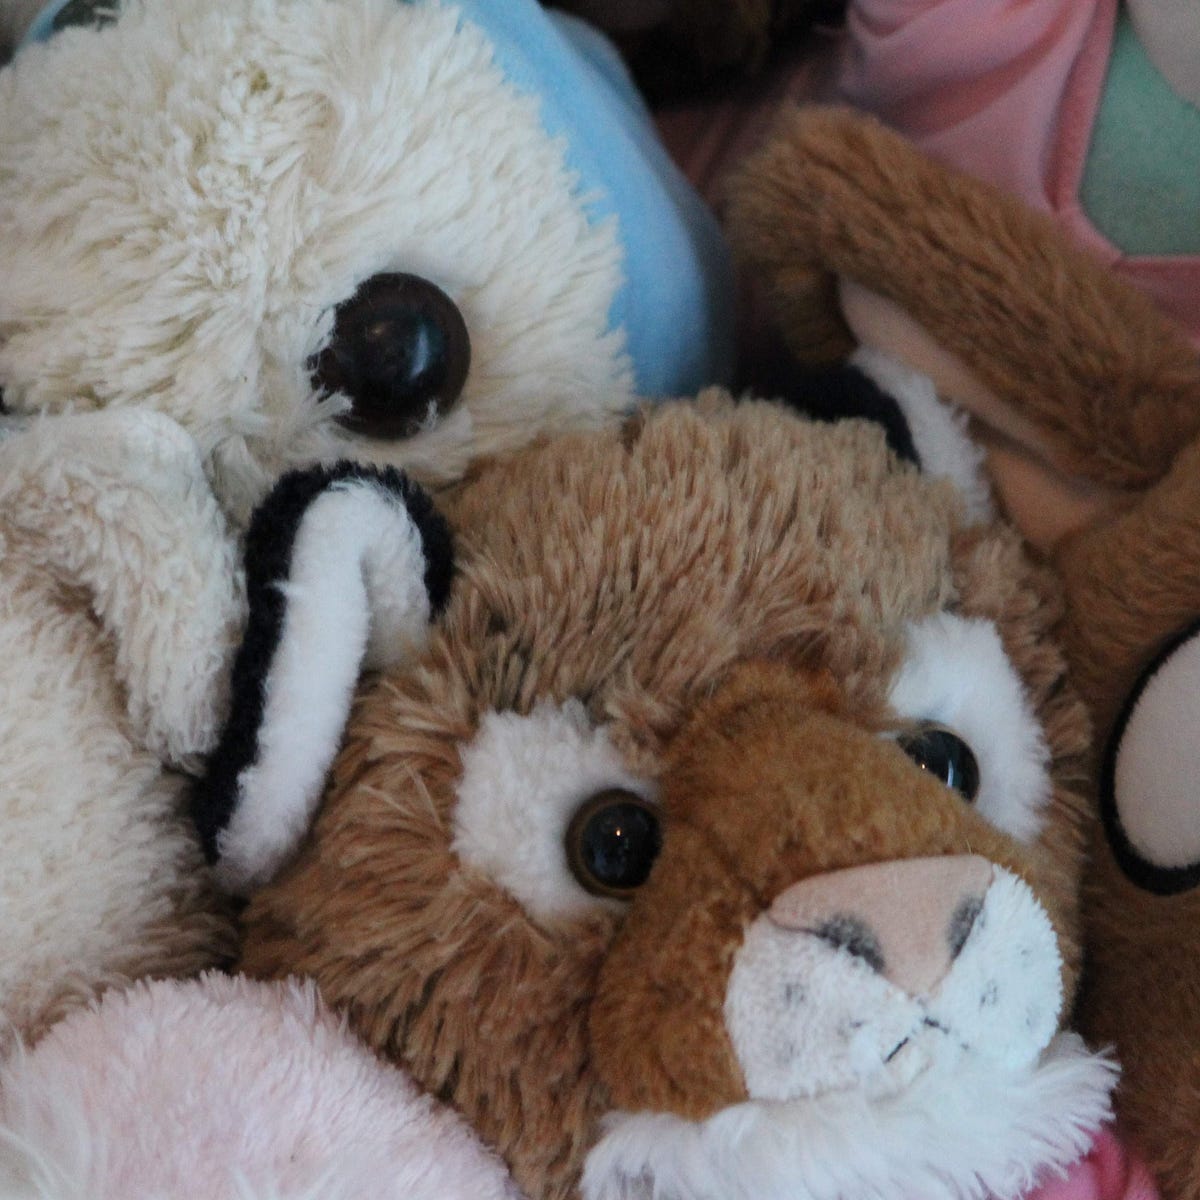 My Stuffed Animals. Childhood Memories & Companions | by Aabye-Gayle F. |  Indelible Ink | Medium